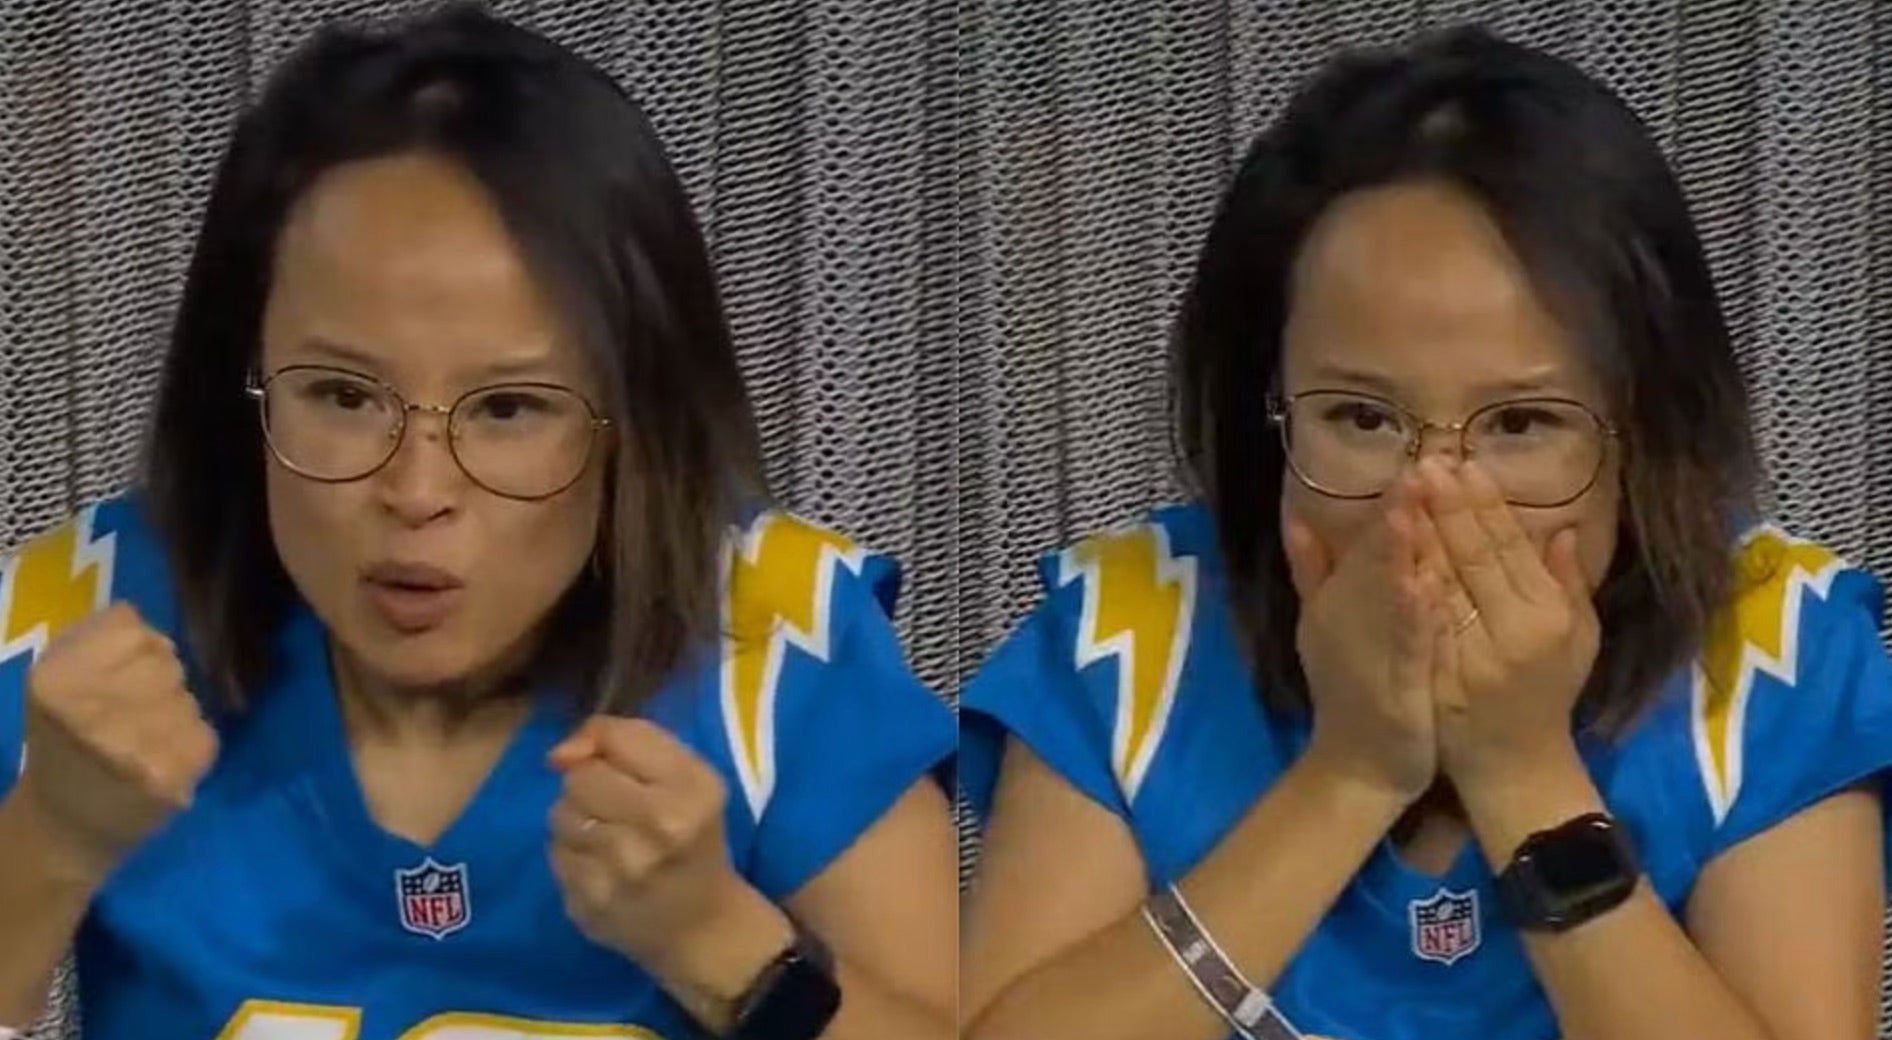 Merrianne Do went viral for her dramatic reactions